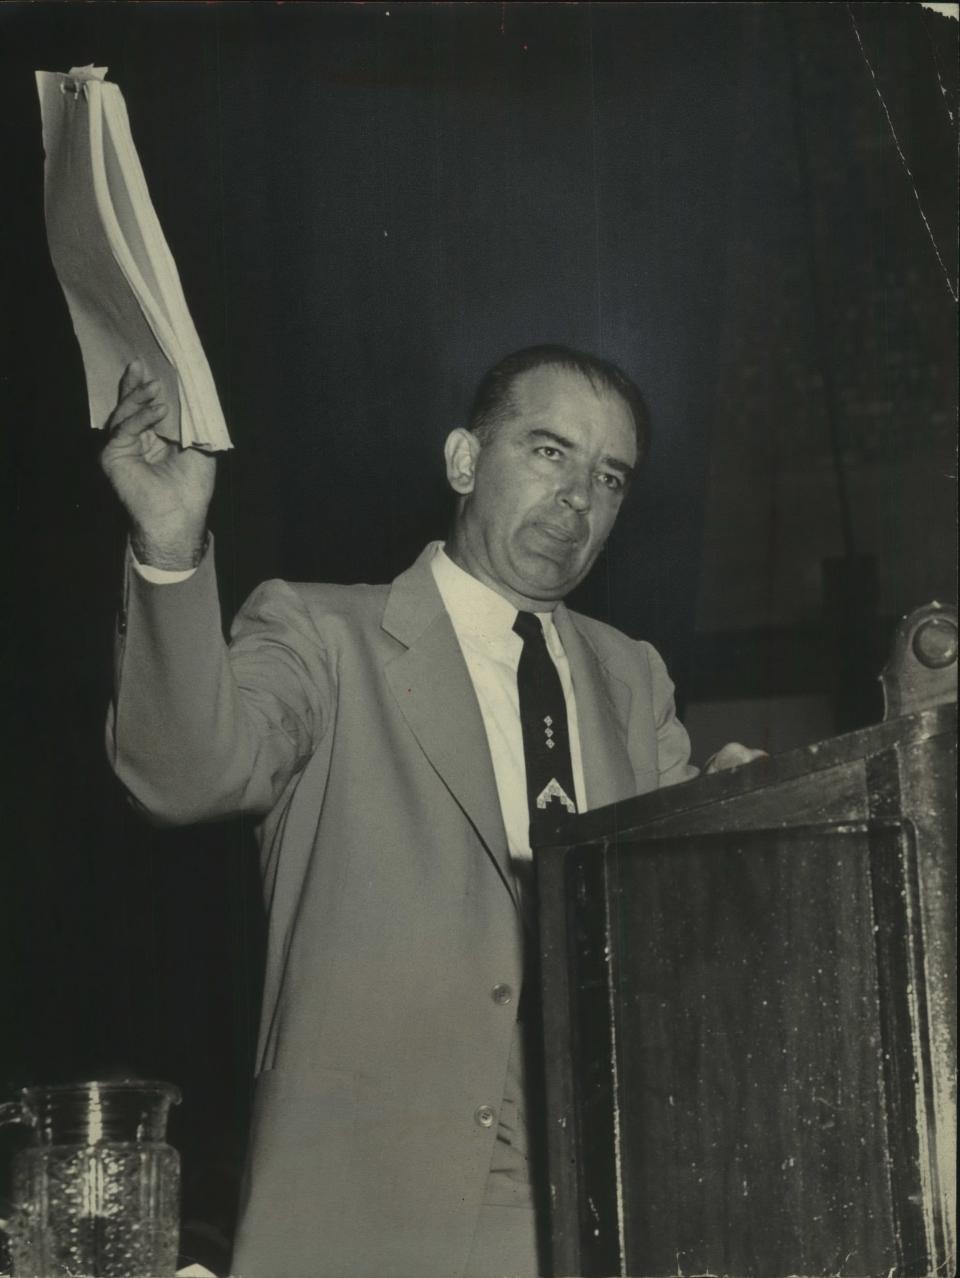 Senator Joseph McCarthy speaking at Shorewood auditorium. He had a list, he said. "I have a list," Joe McCarthy told an audience in Shorewood in 1952. His charges that Communists had infiltrated the US government inflamed the nation.